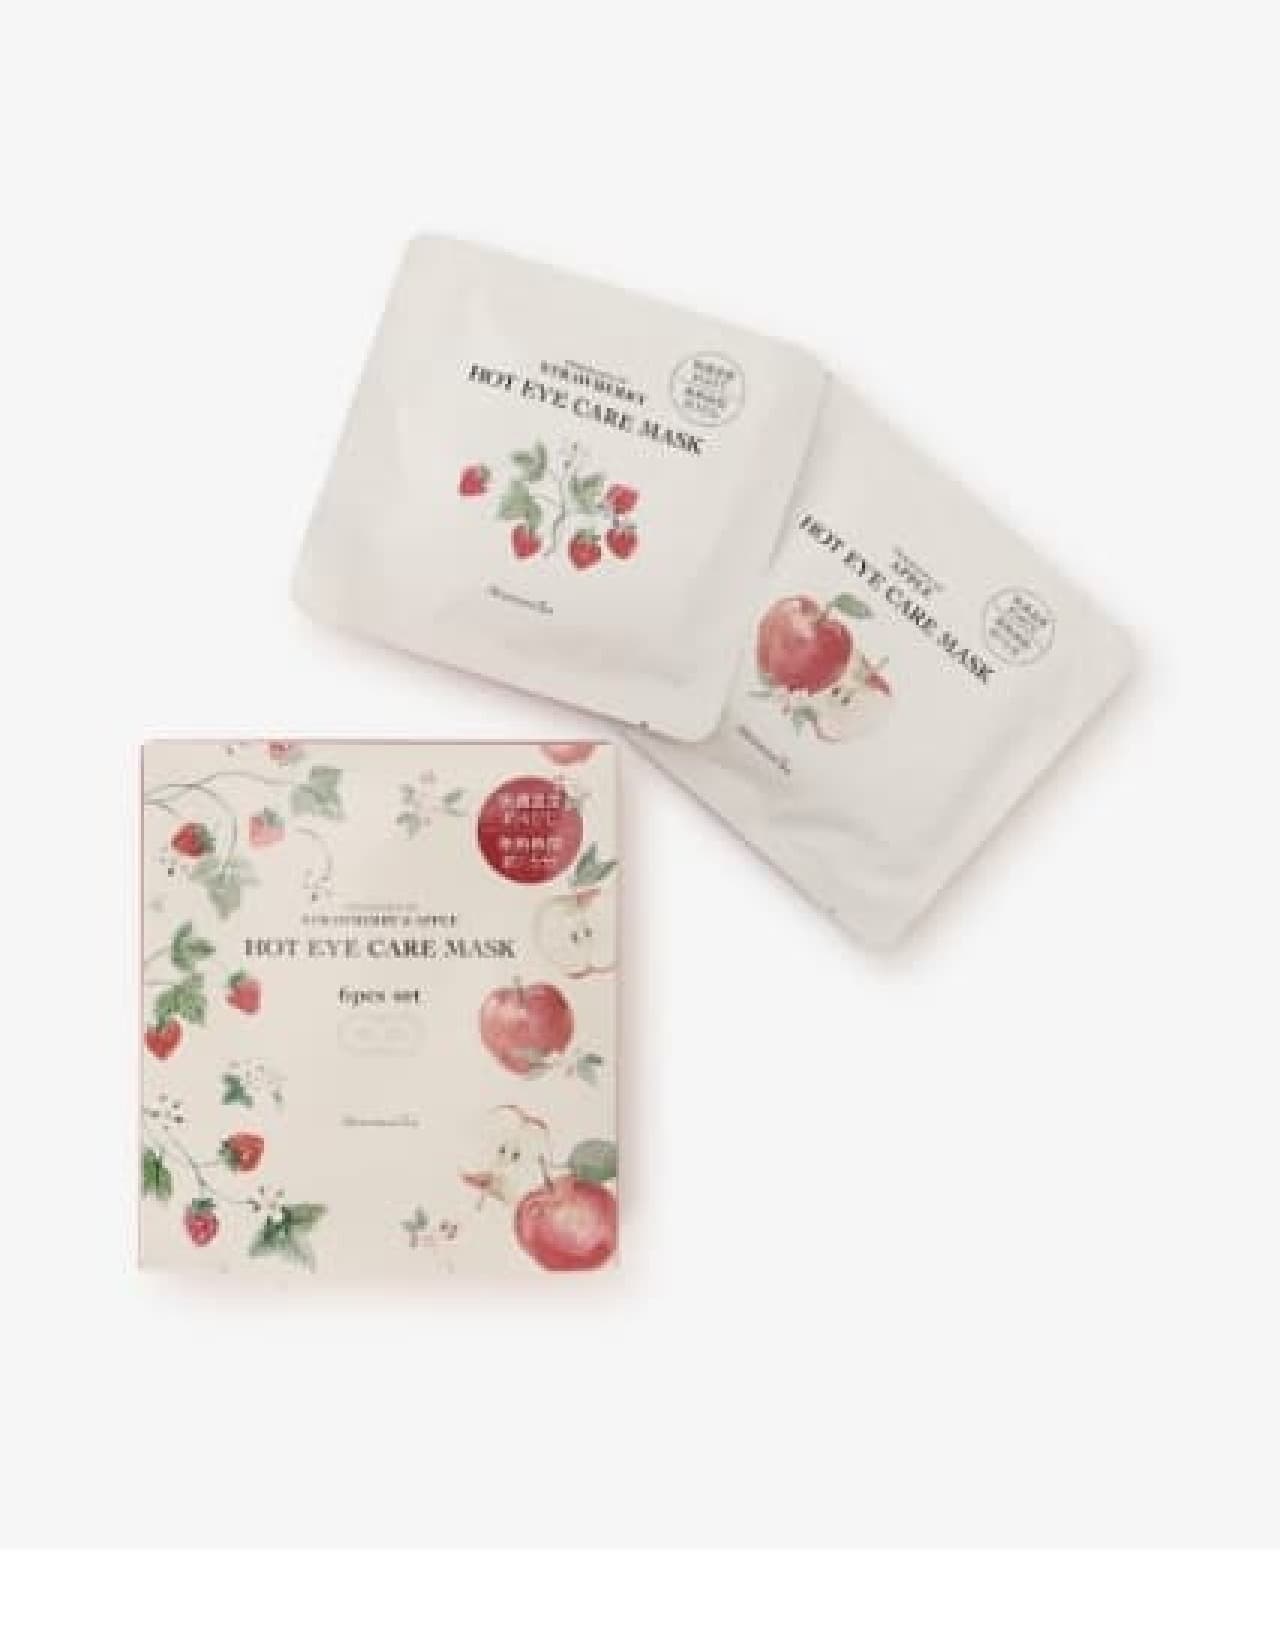 Strawberry & Apple Hot Eye Care Mask 6 pieces